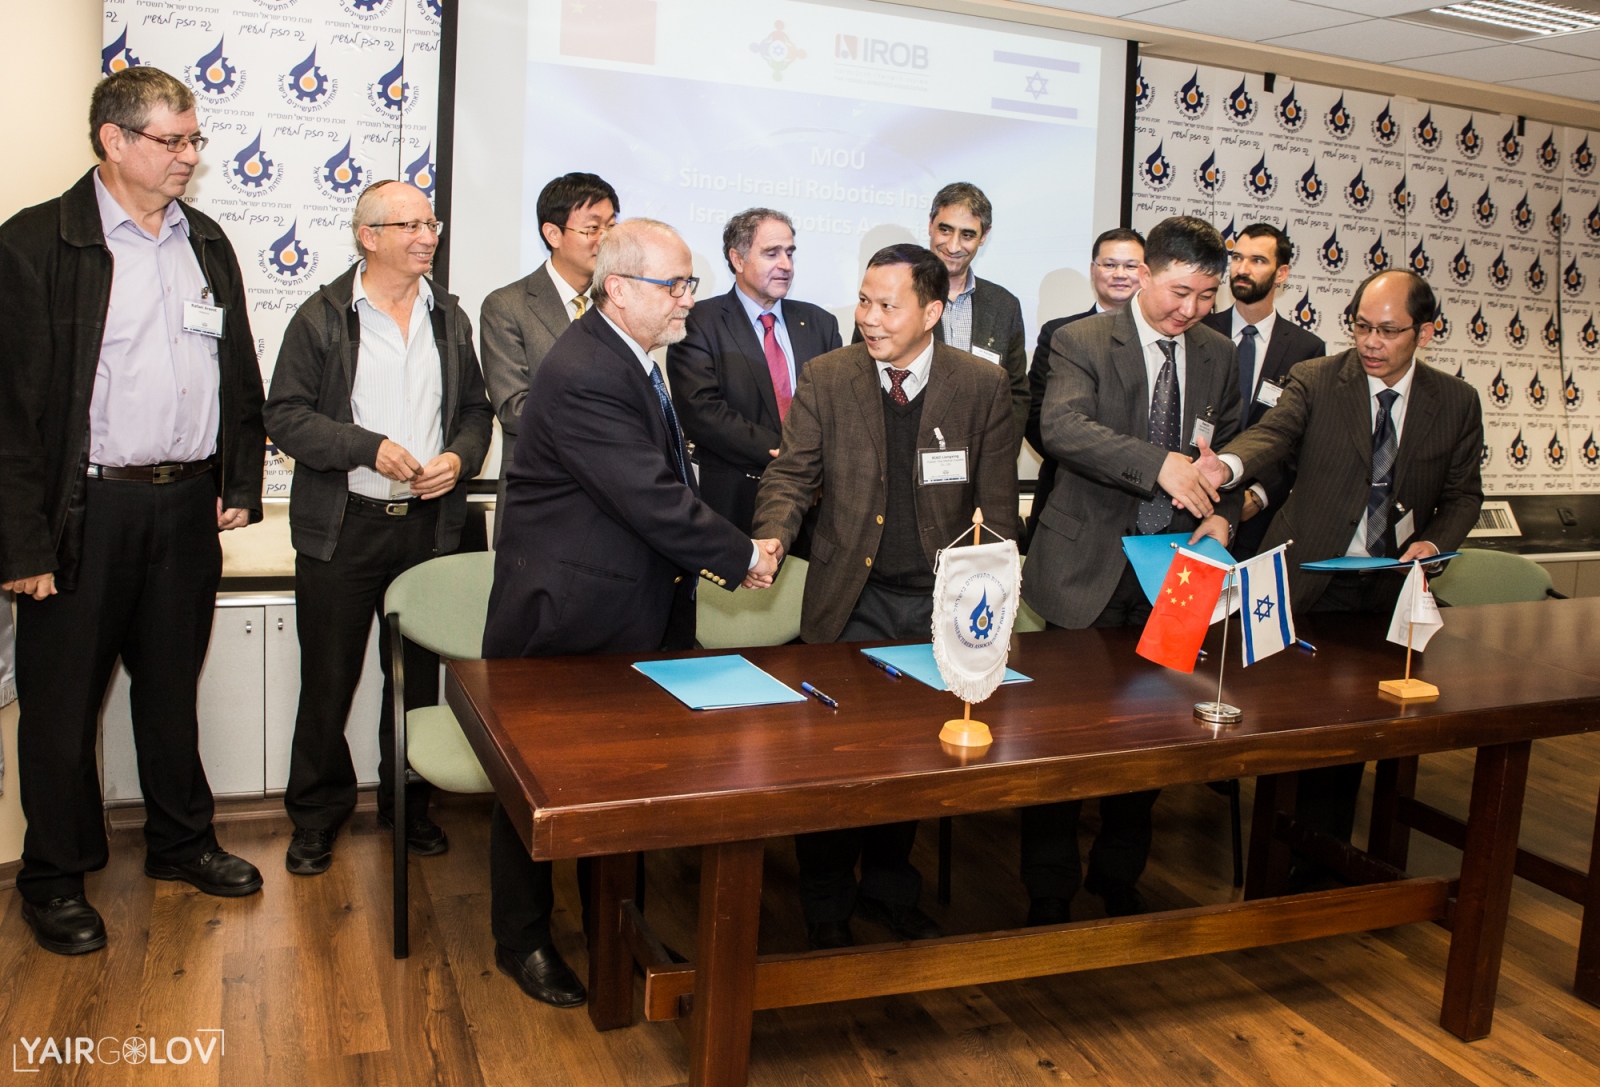 Israeli Robotics Association President Prof. Zvi Shiller, left, at table, shaking hands with officials from China at the MoU signing. Photo by Yair Golov